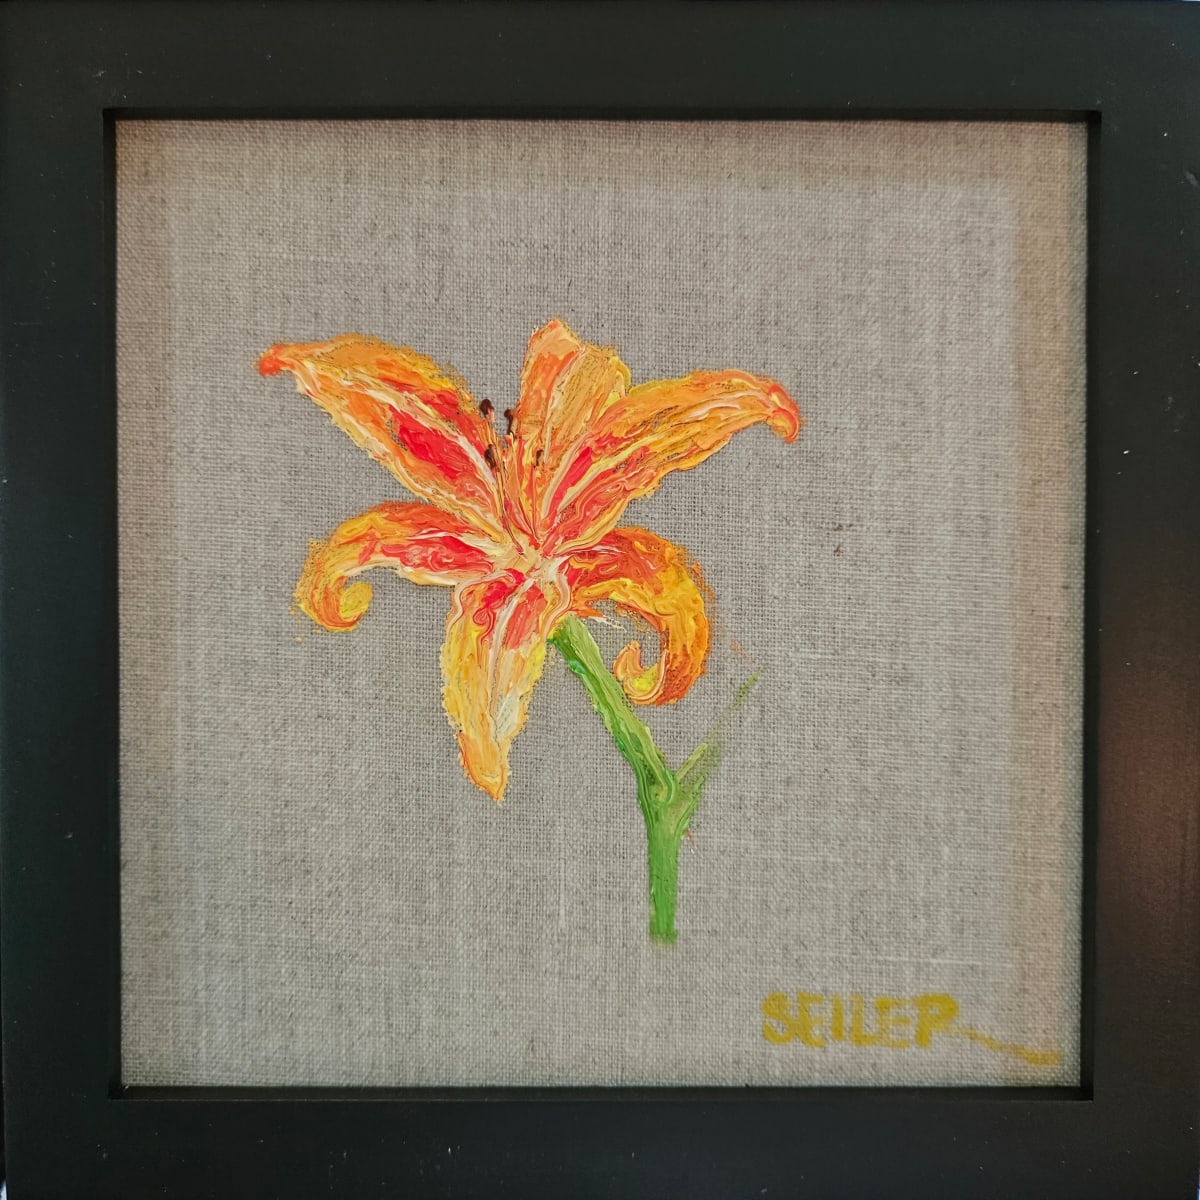 Simple Lilly by Jill Seiler  Image: Love the simple bloom on linen.  Very textural. Yummy